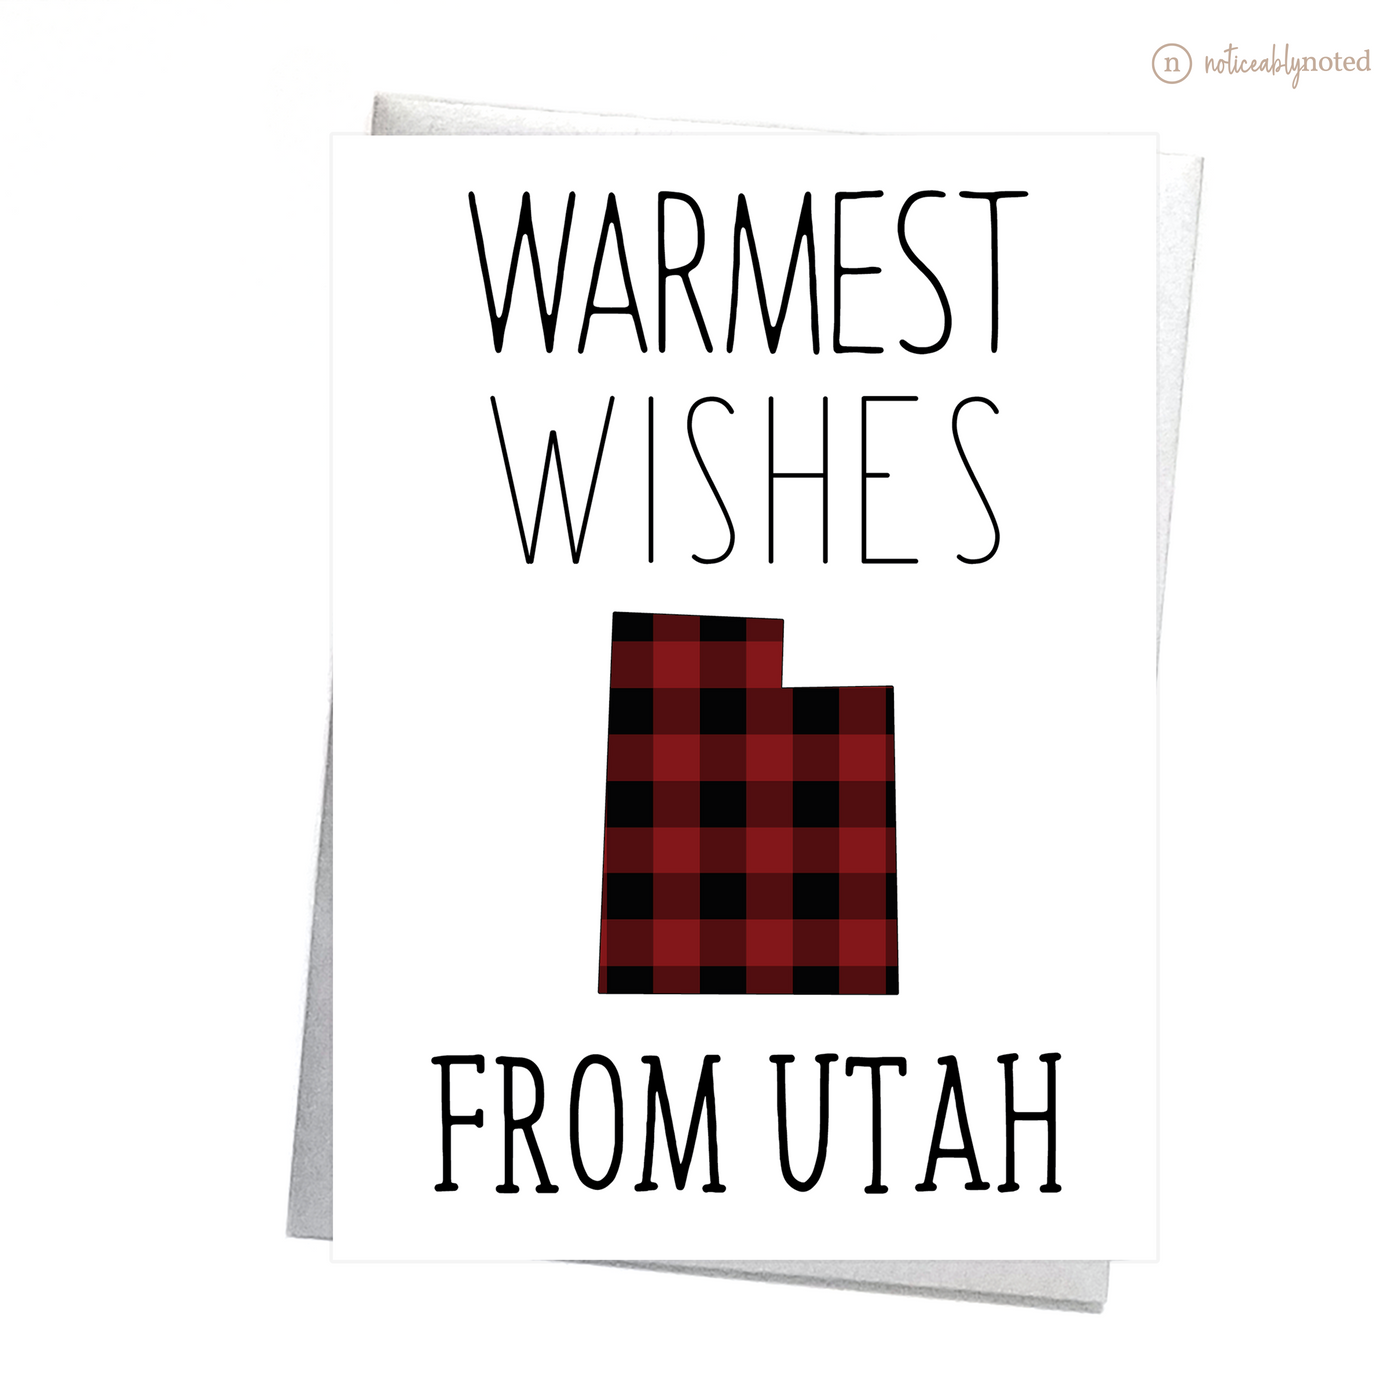 Utah Holiday Card - Warmest Wishes | Noticeably Noted